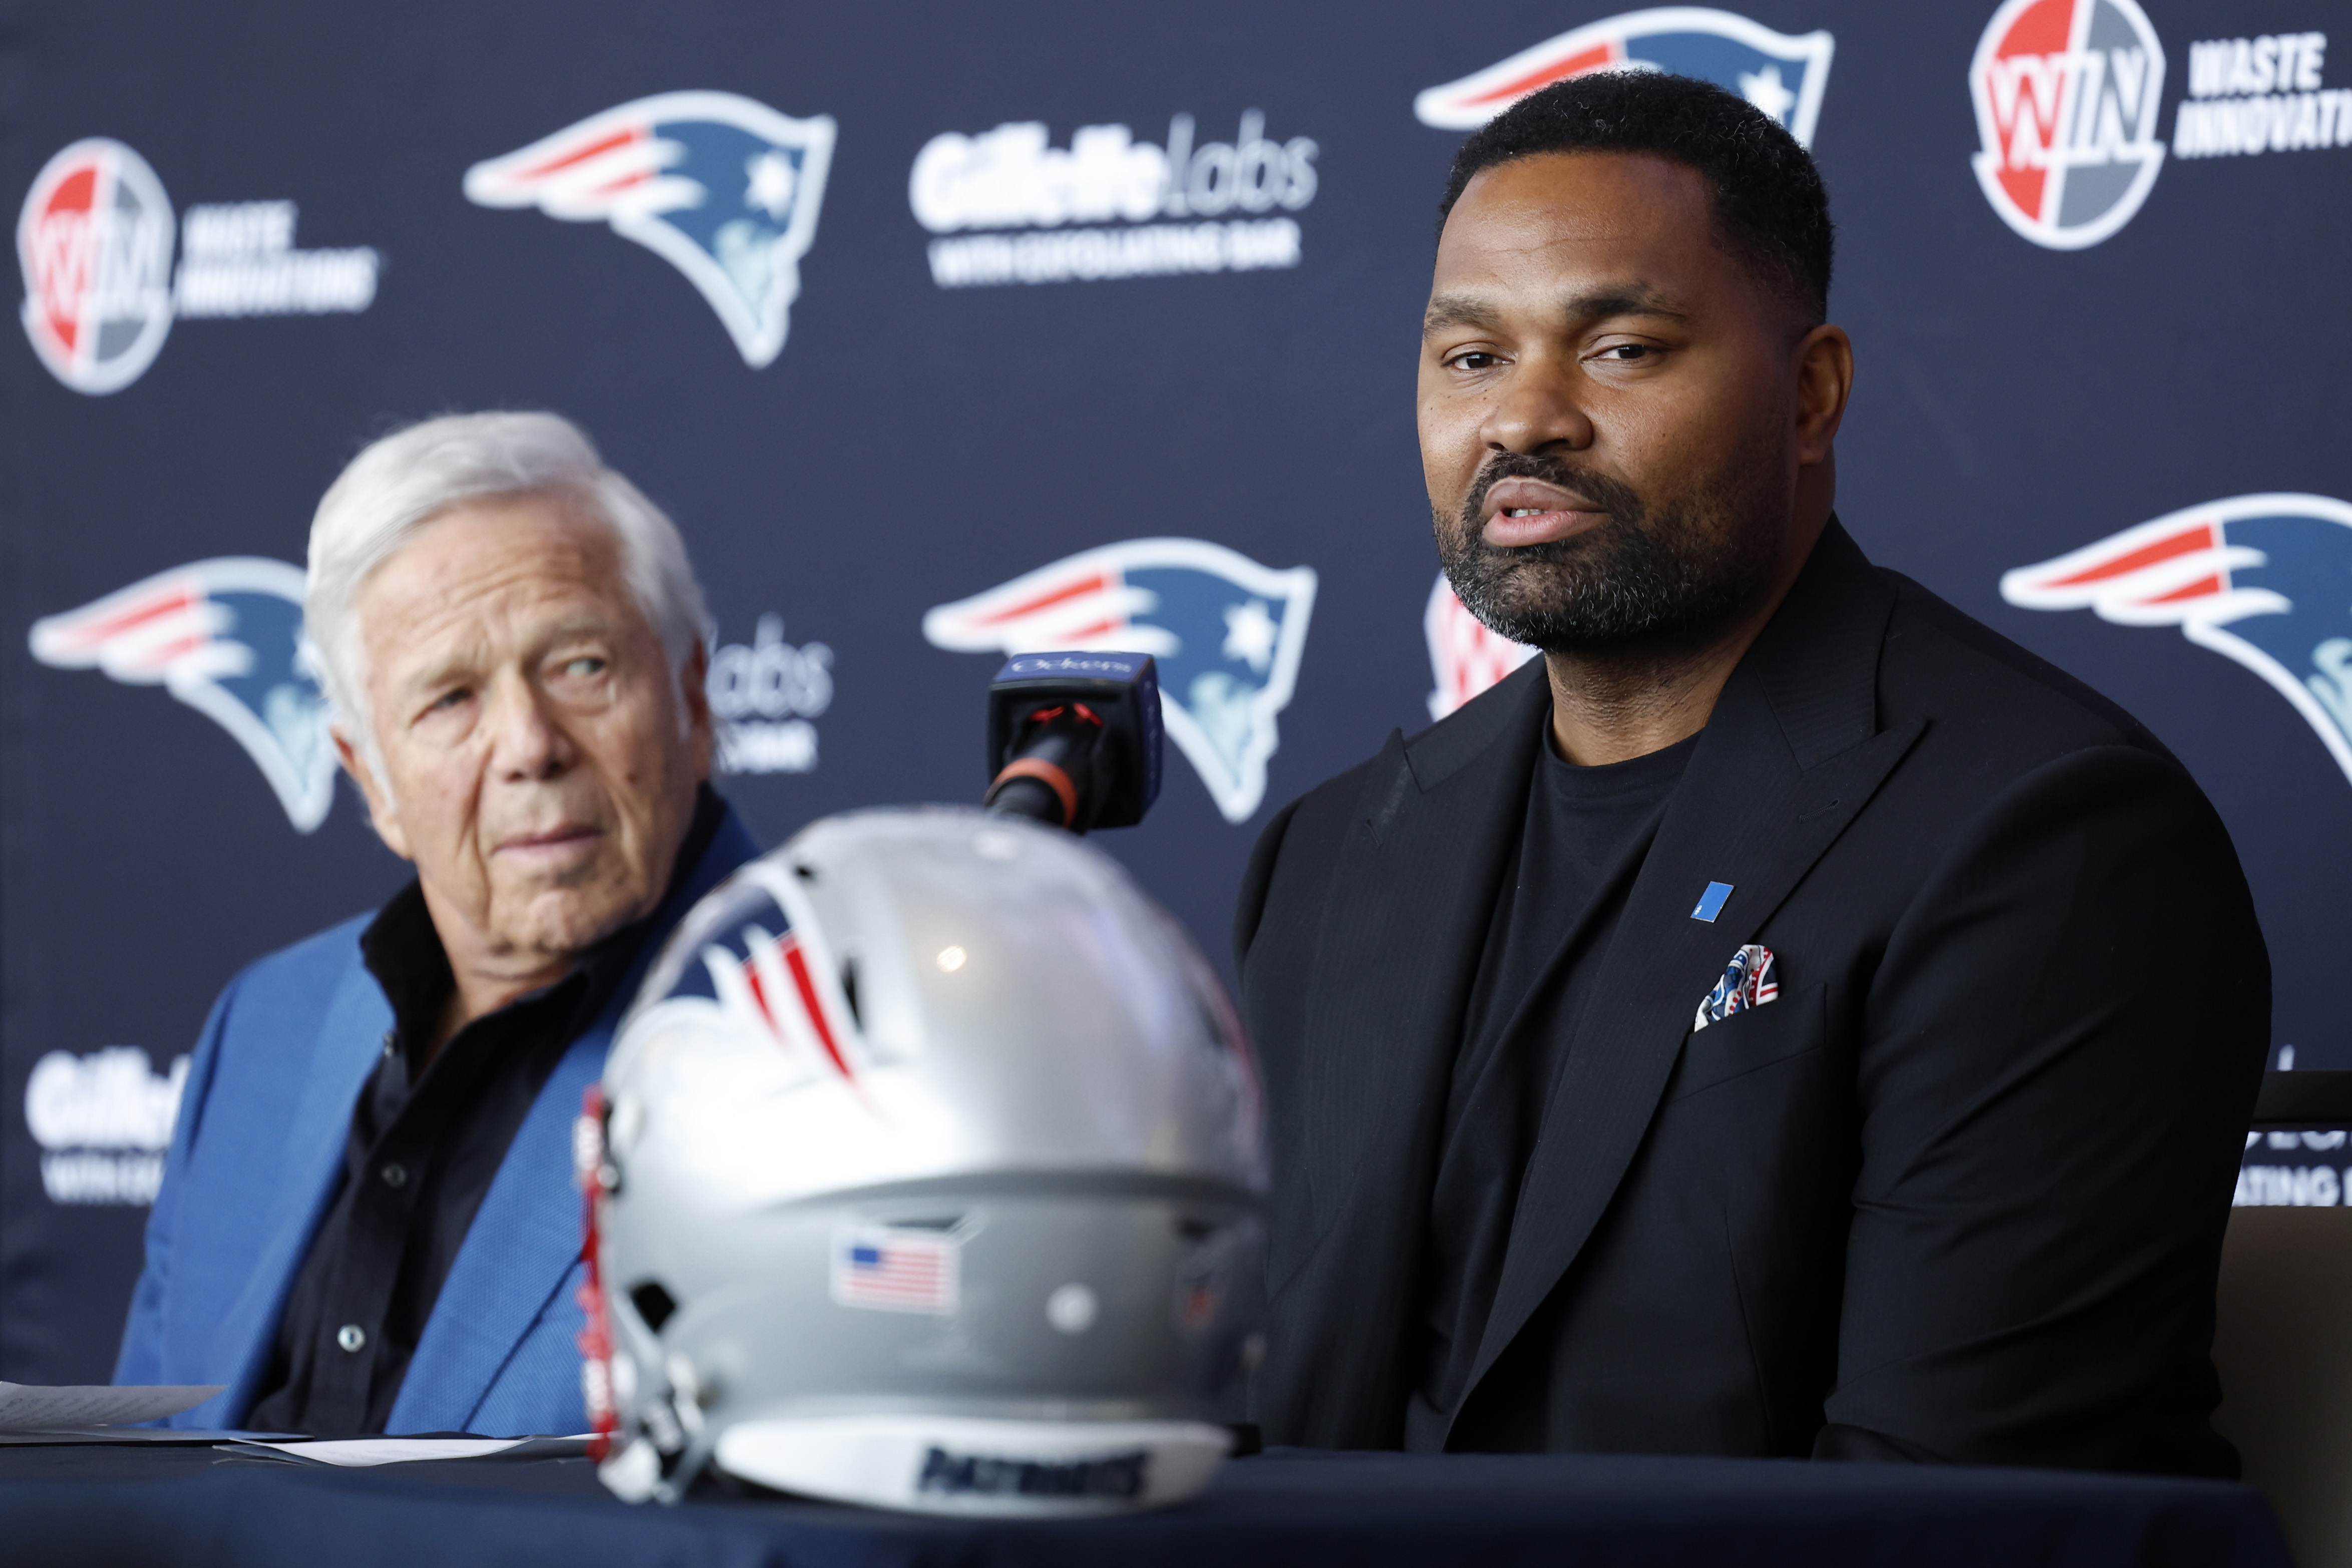 Foxborough, MA - January 17: New England Patriots head coach Jerod Mayo, right, speaks during his introductory press conference with owner Robert Kraft at Gillette Stadium. (